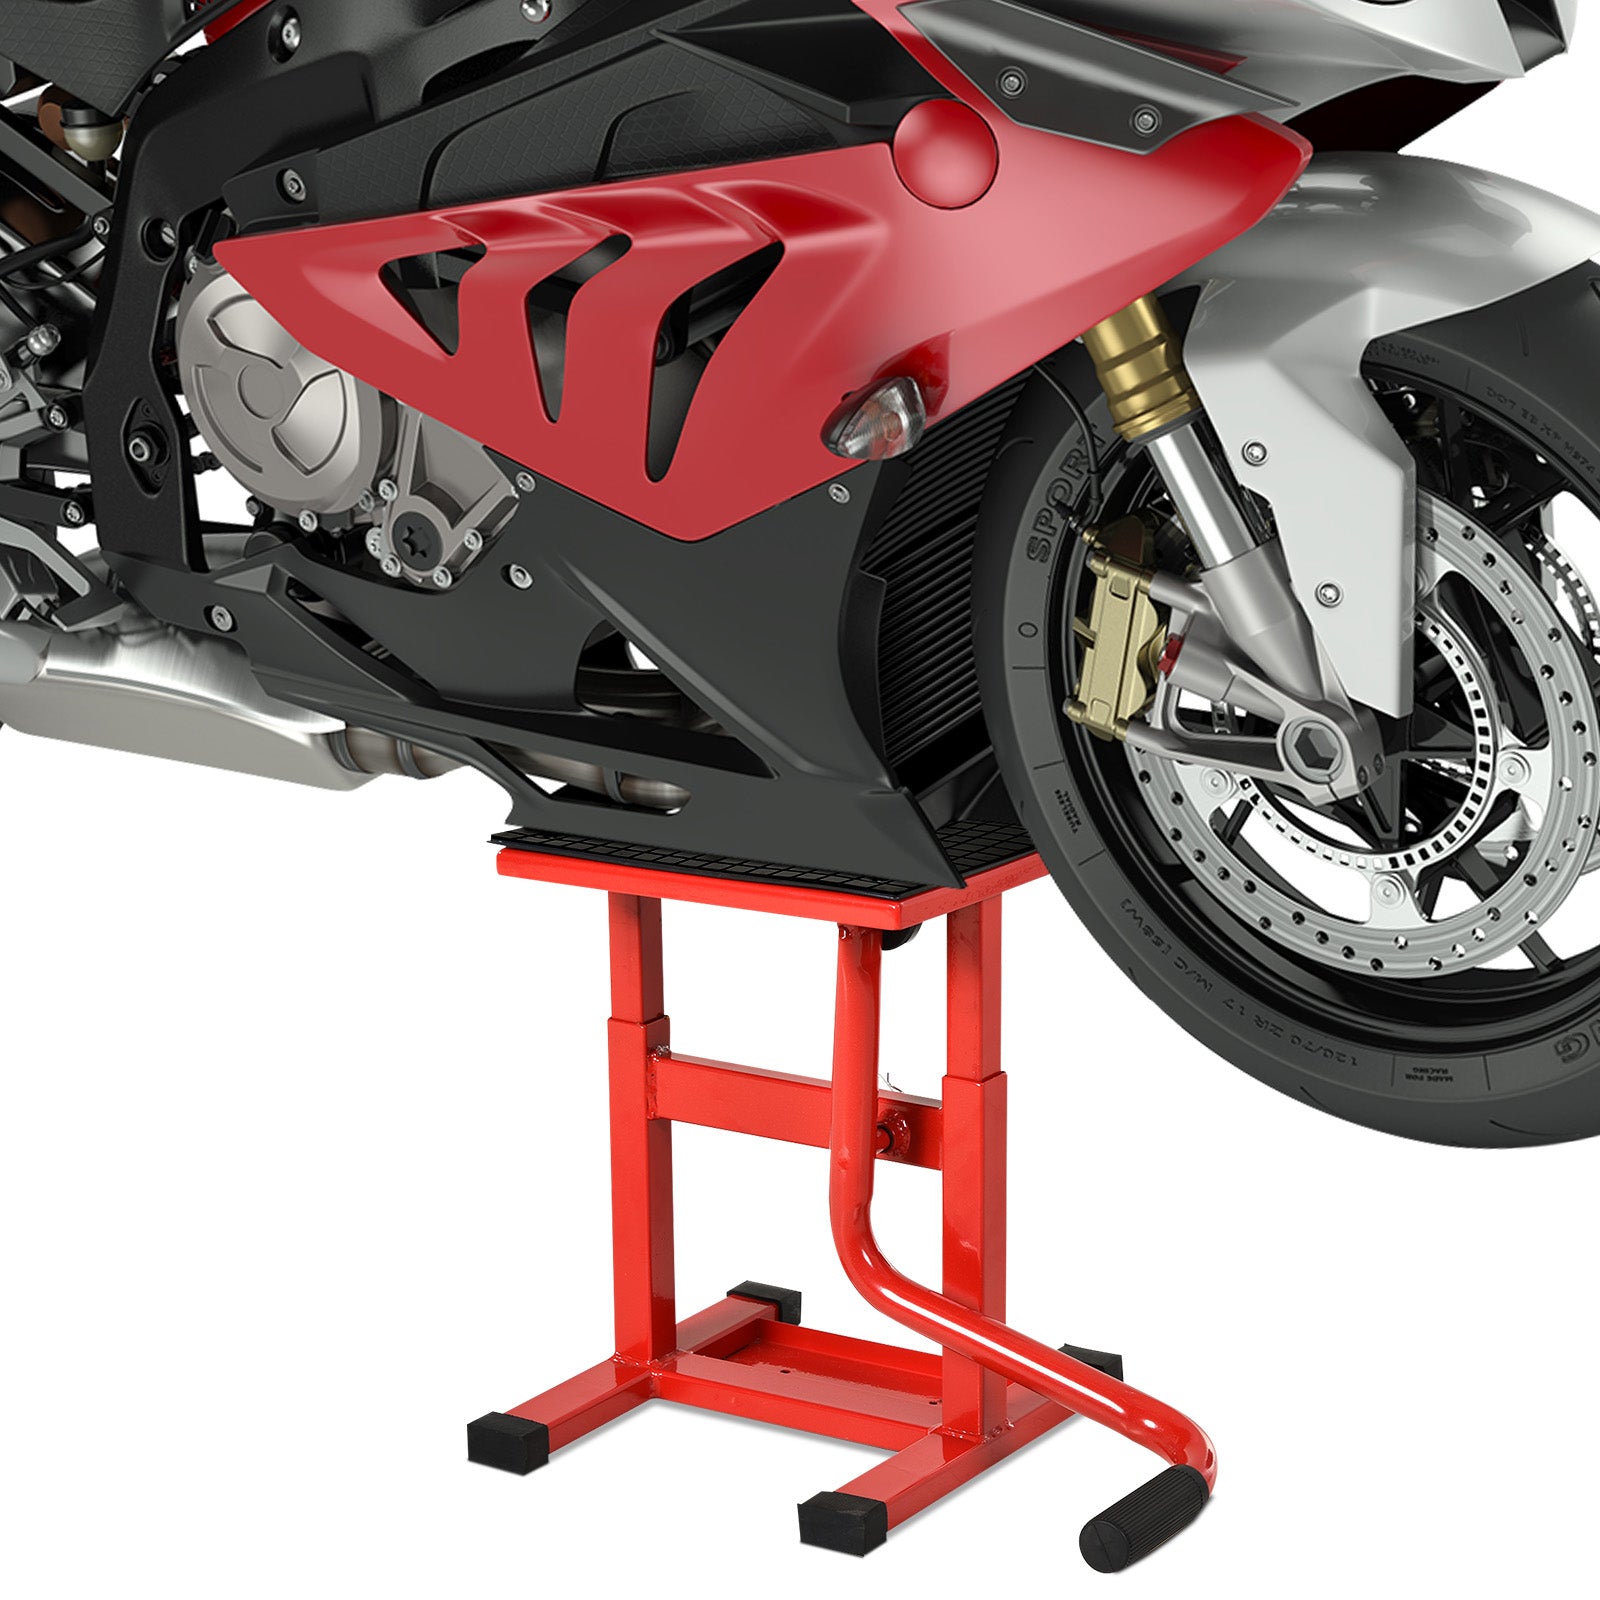 Motorcycle Lift Stand - DURHAND  | TJ Hughes